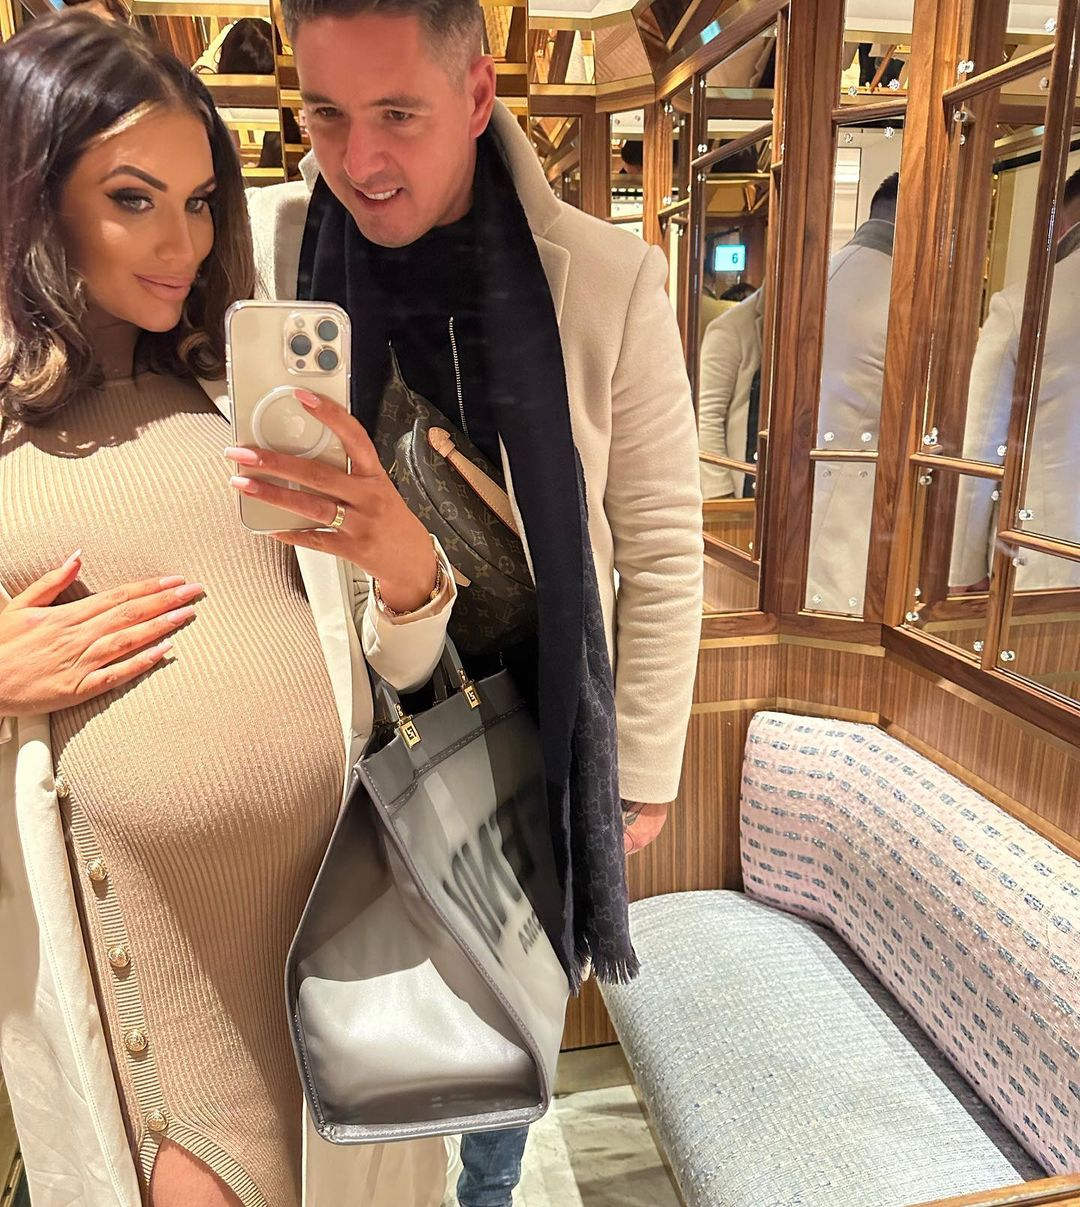 Pregnant Towie star in hospital hell as she’s forced to call medics at 3.30am